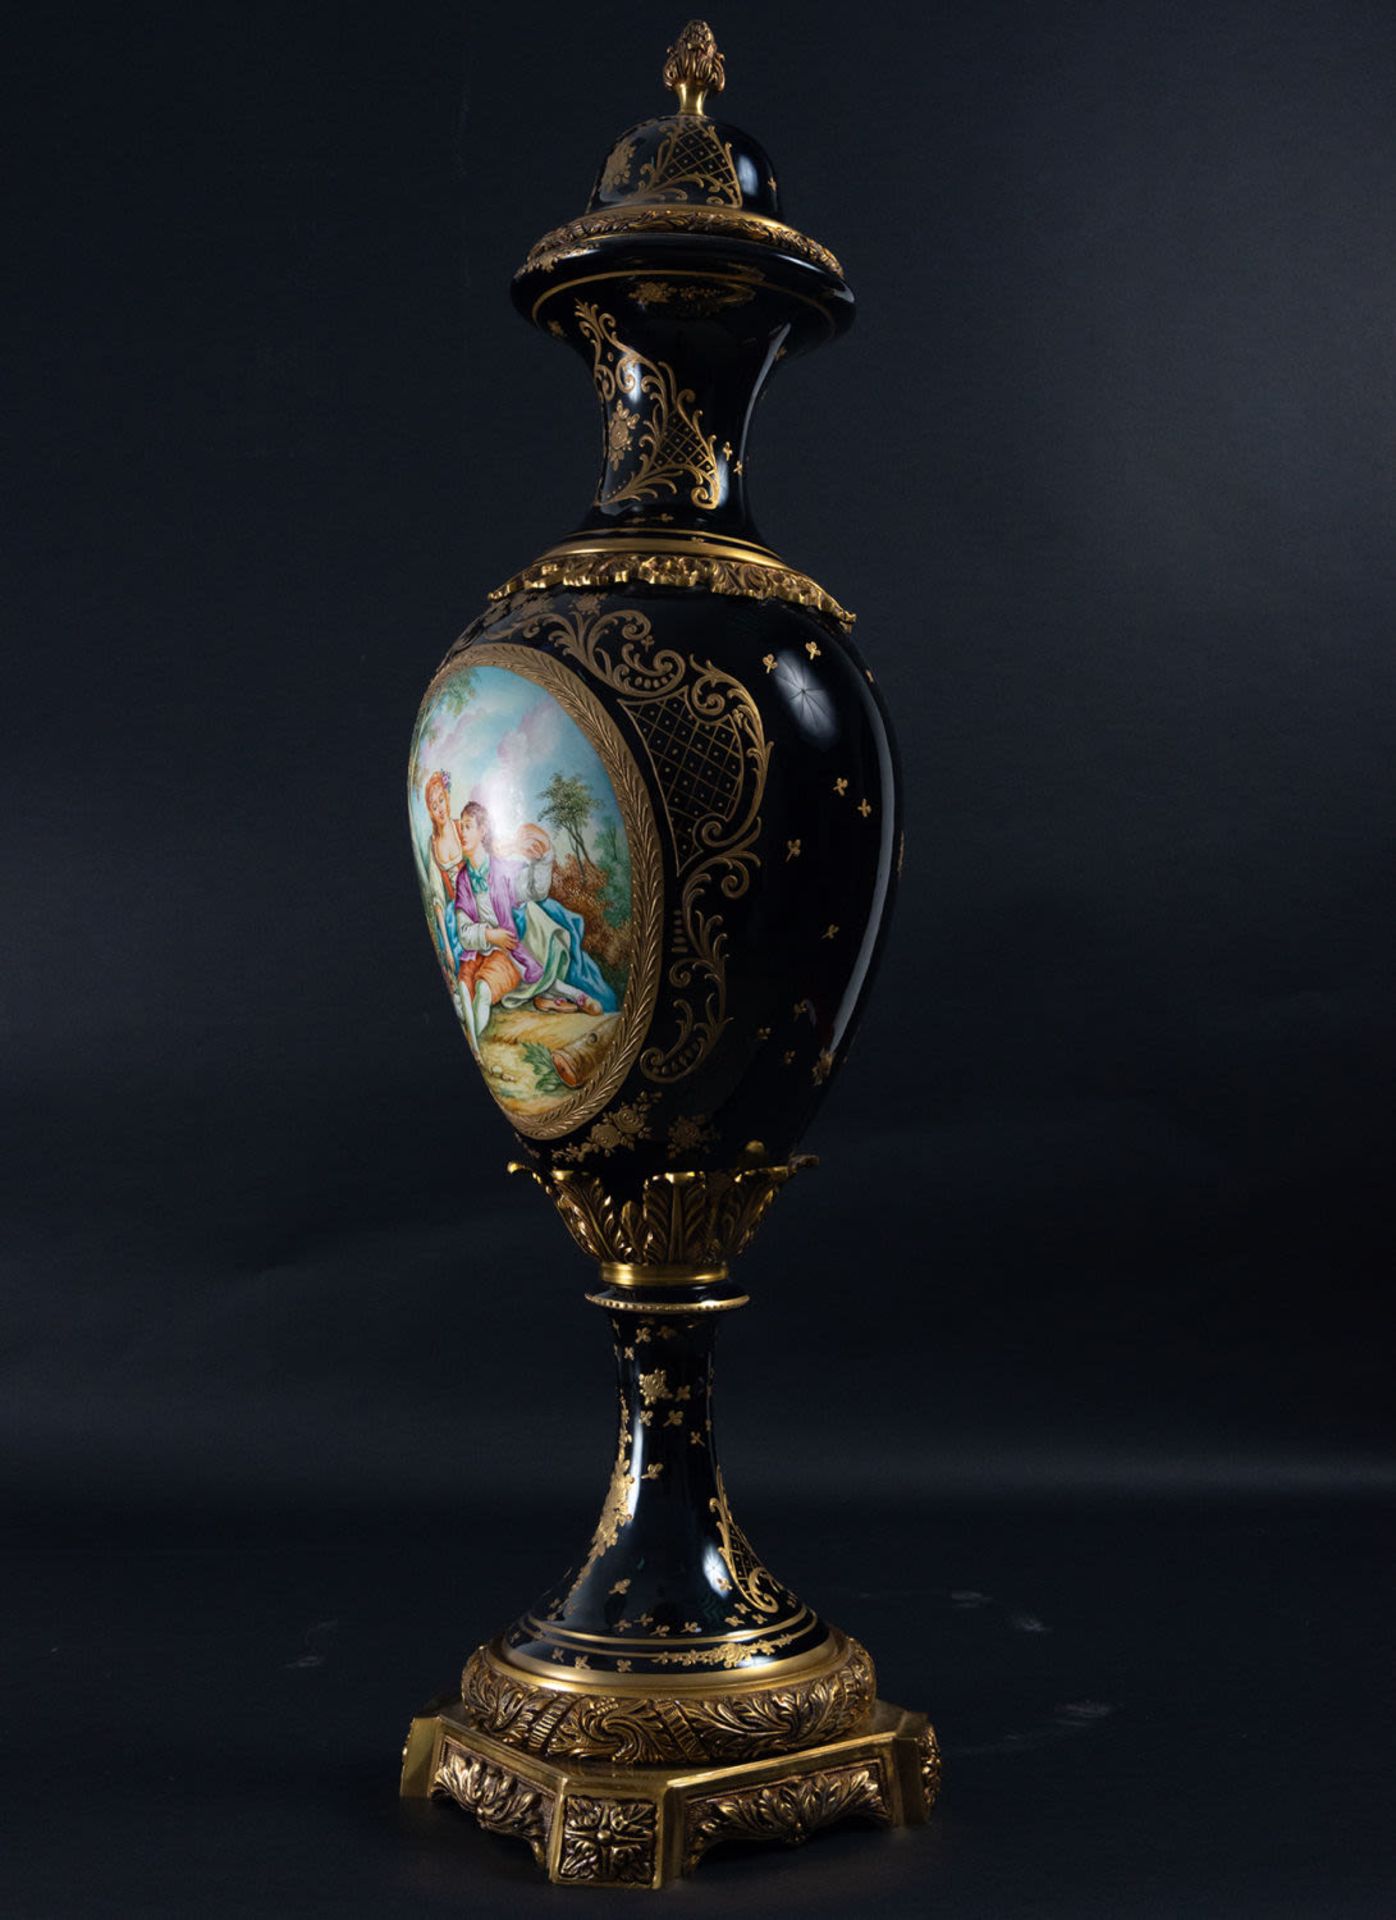 Pair of Large Vases in Polychrome Old Paris Tender Porcelain, late 19th century - Image 11 of 11